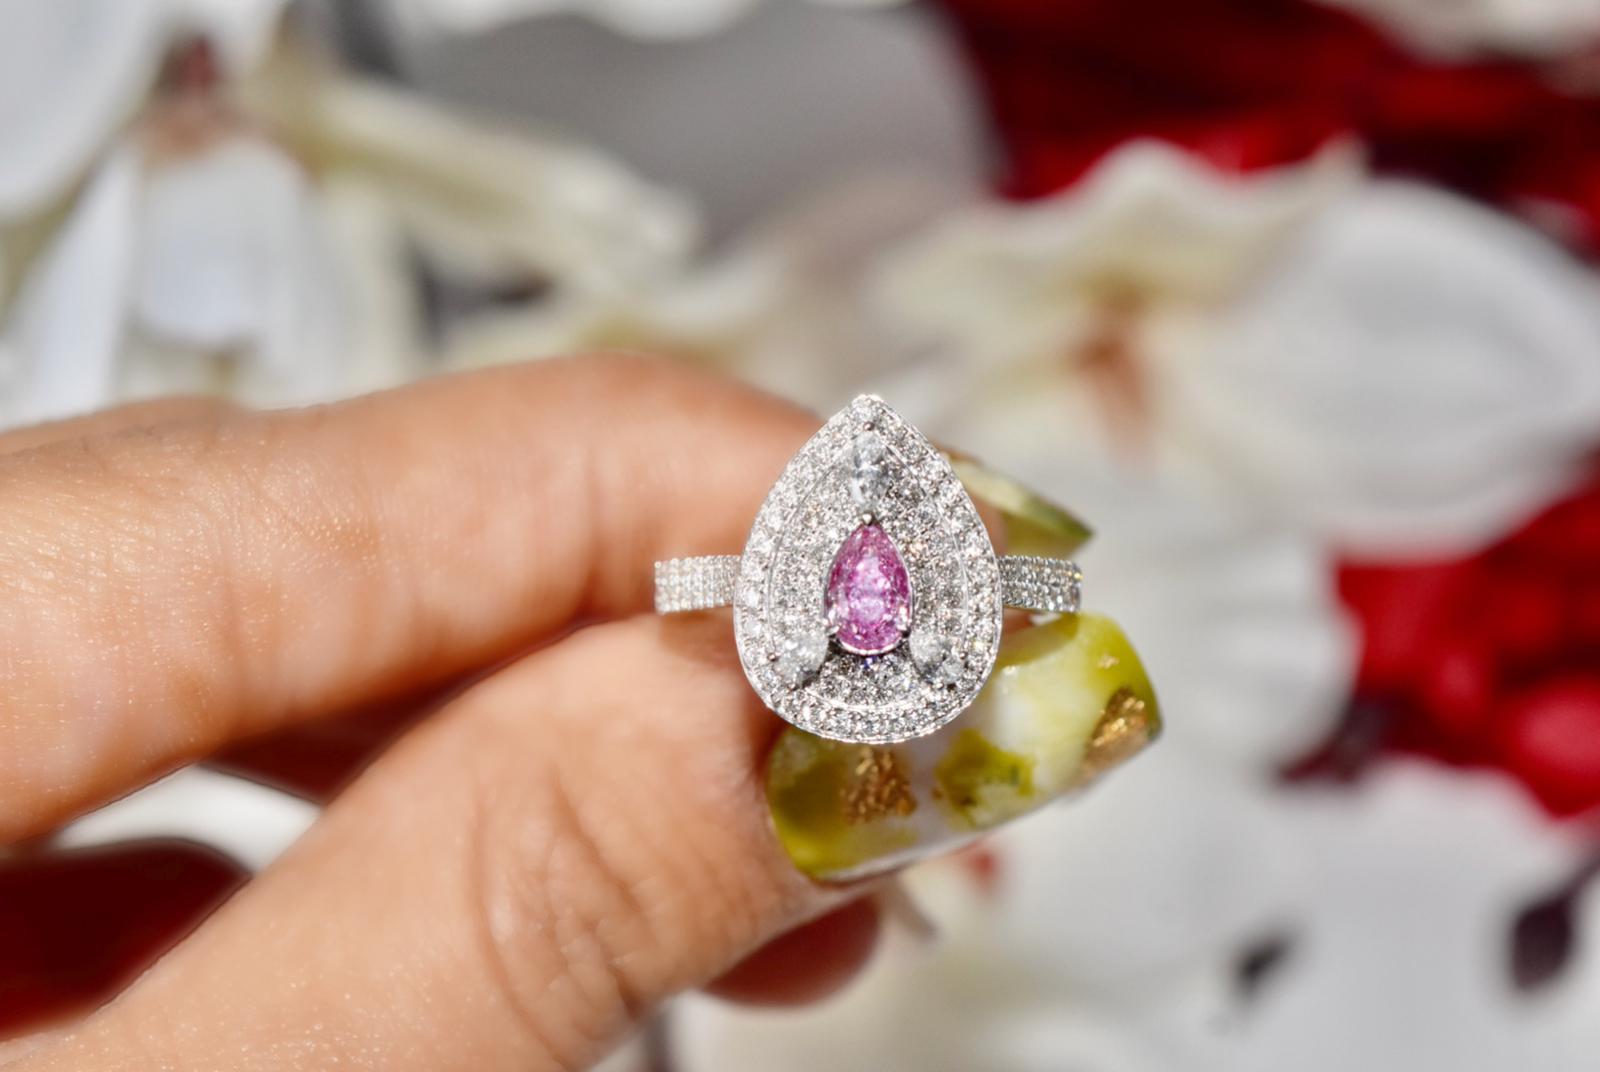 **100% NATURAL FANCY COLOUR DIAMOND JEWELRY**

✪ Jewelry Details ✪

♦ MAIN STONE DETAILS

➛ Stone Shape: Pear
➛ Stone Color: Faint Pink
➛ Stone Weight: 0.31 carat
➛ Clarity: SI2
➛ GIA certified

♦ SIDE STONE DETAILS

➛ Side pear shape diamonds - 2